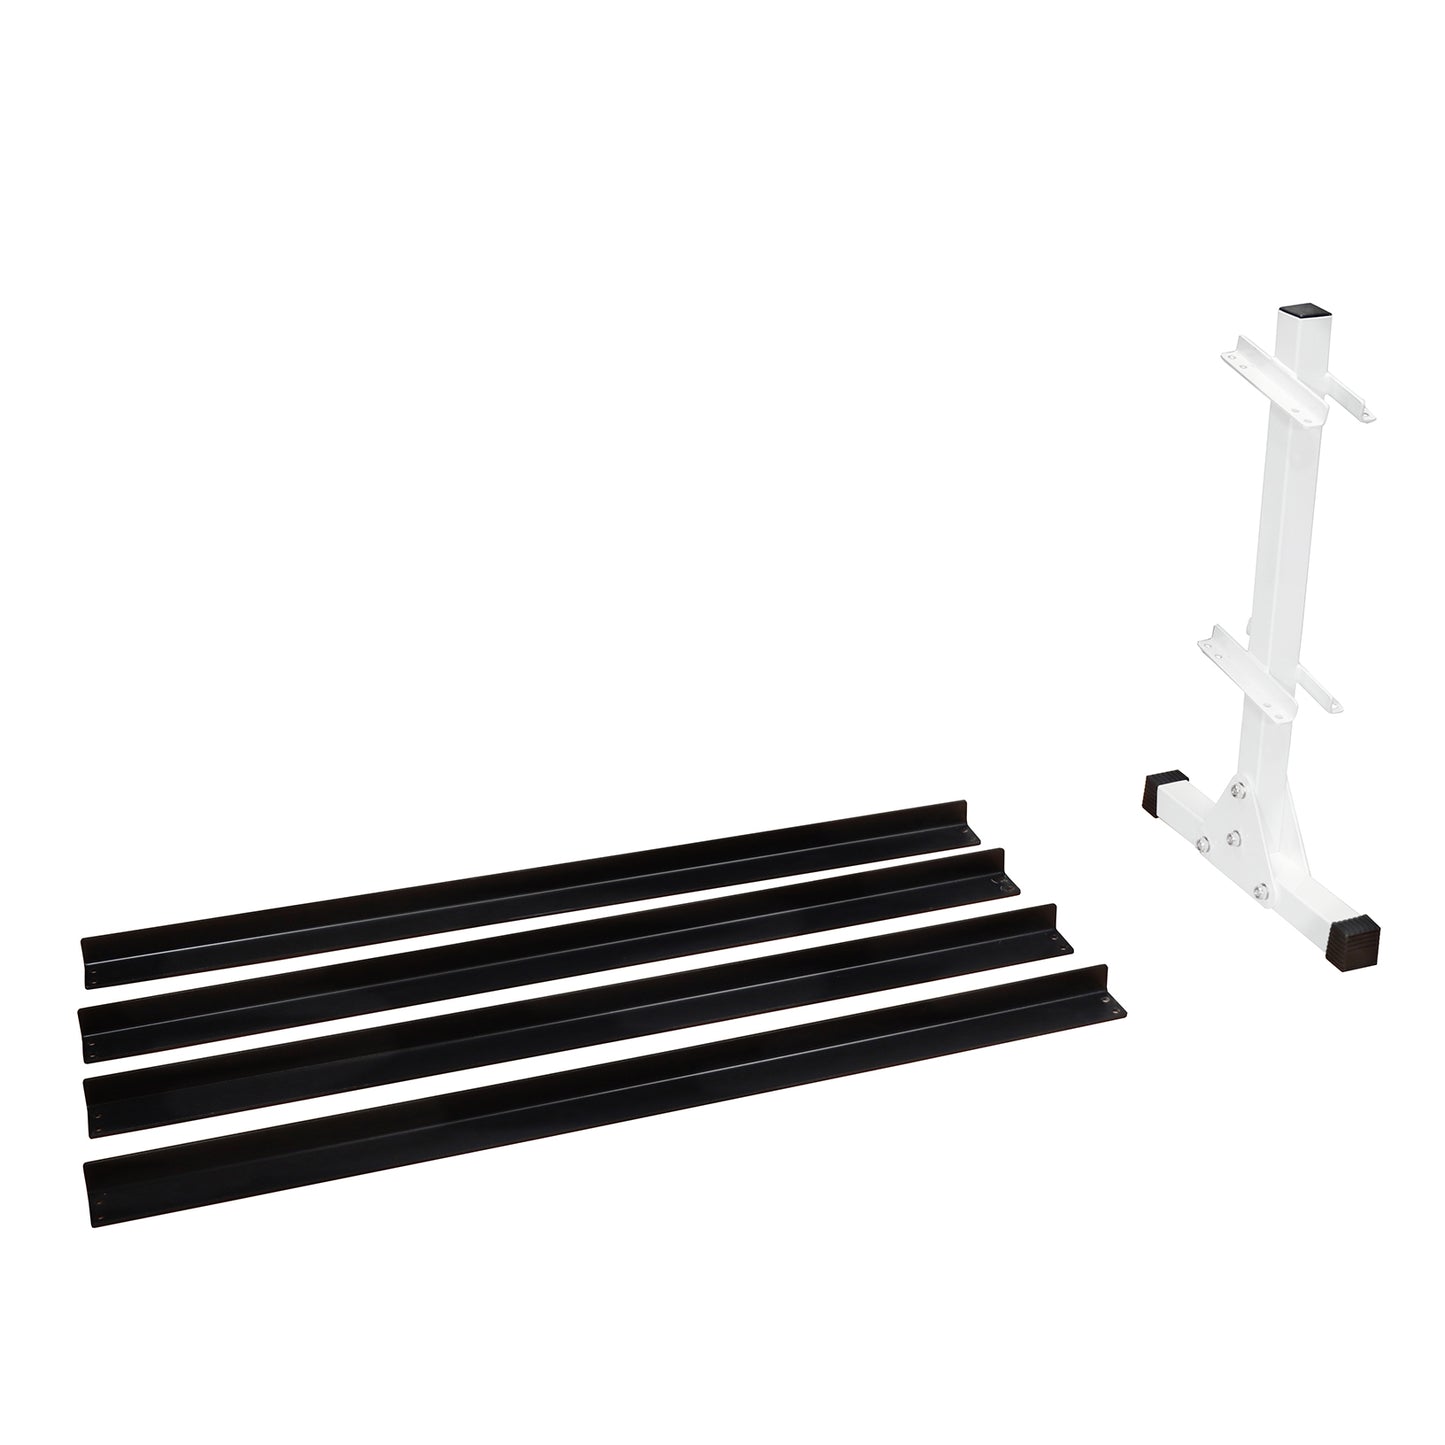 DF510- 55" Two-Tier Dumbbell Rack Extension